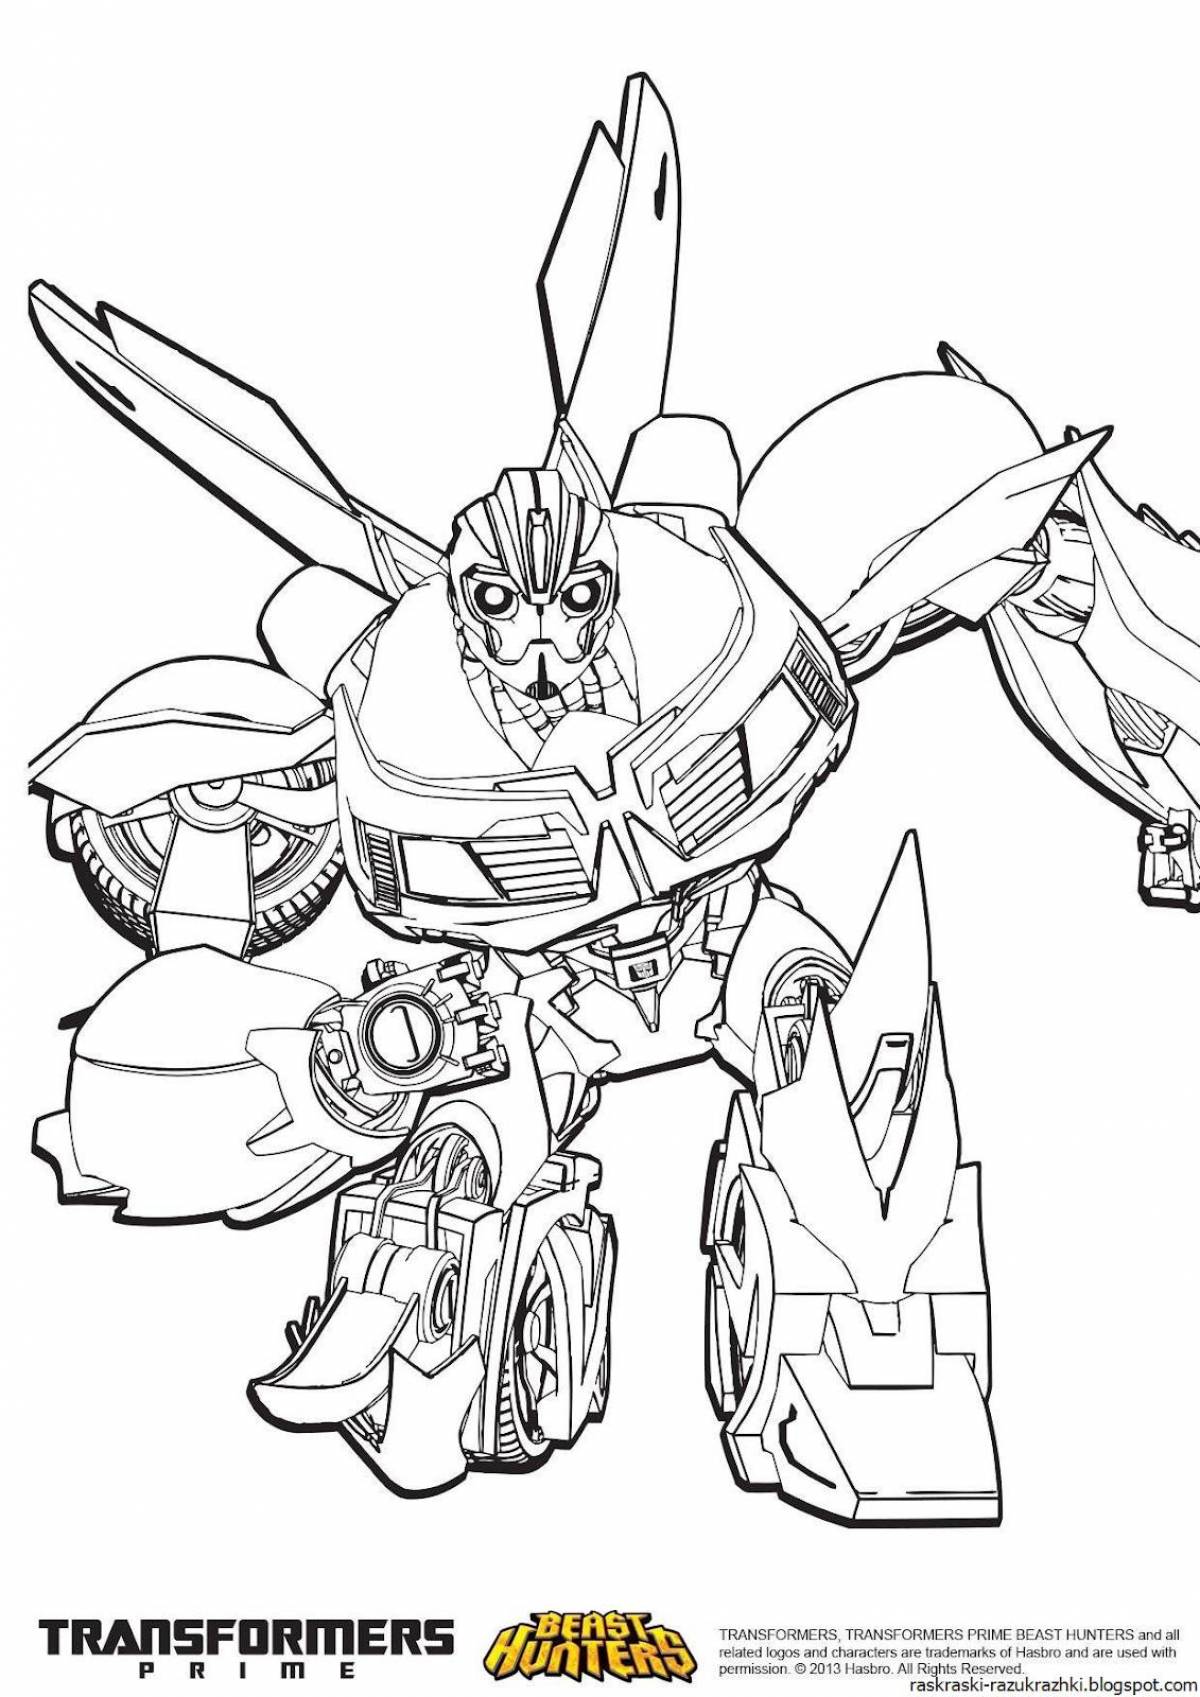 Fancy bumblebee coloring book for kids